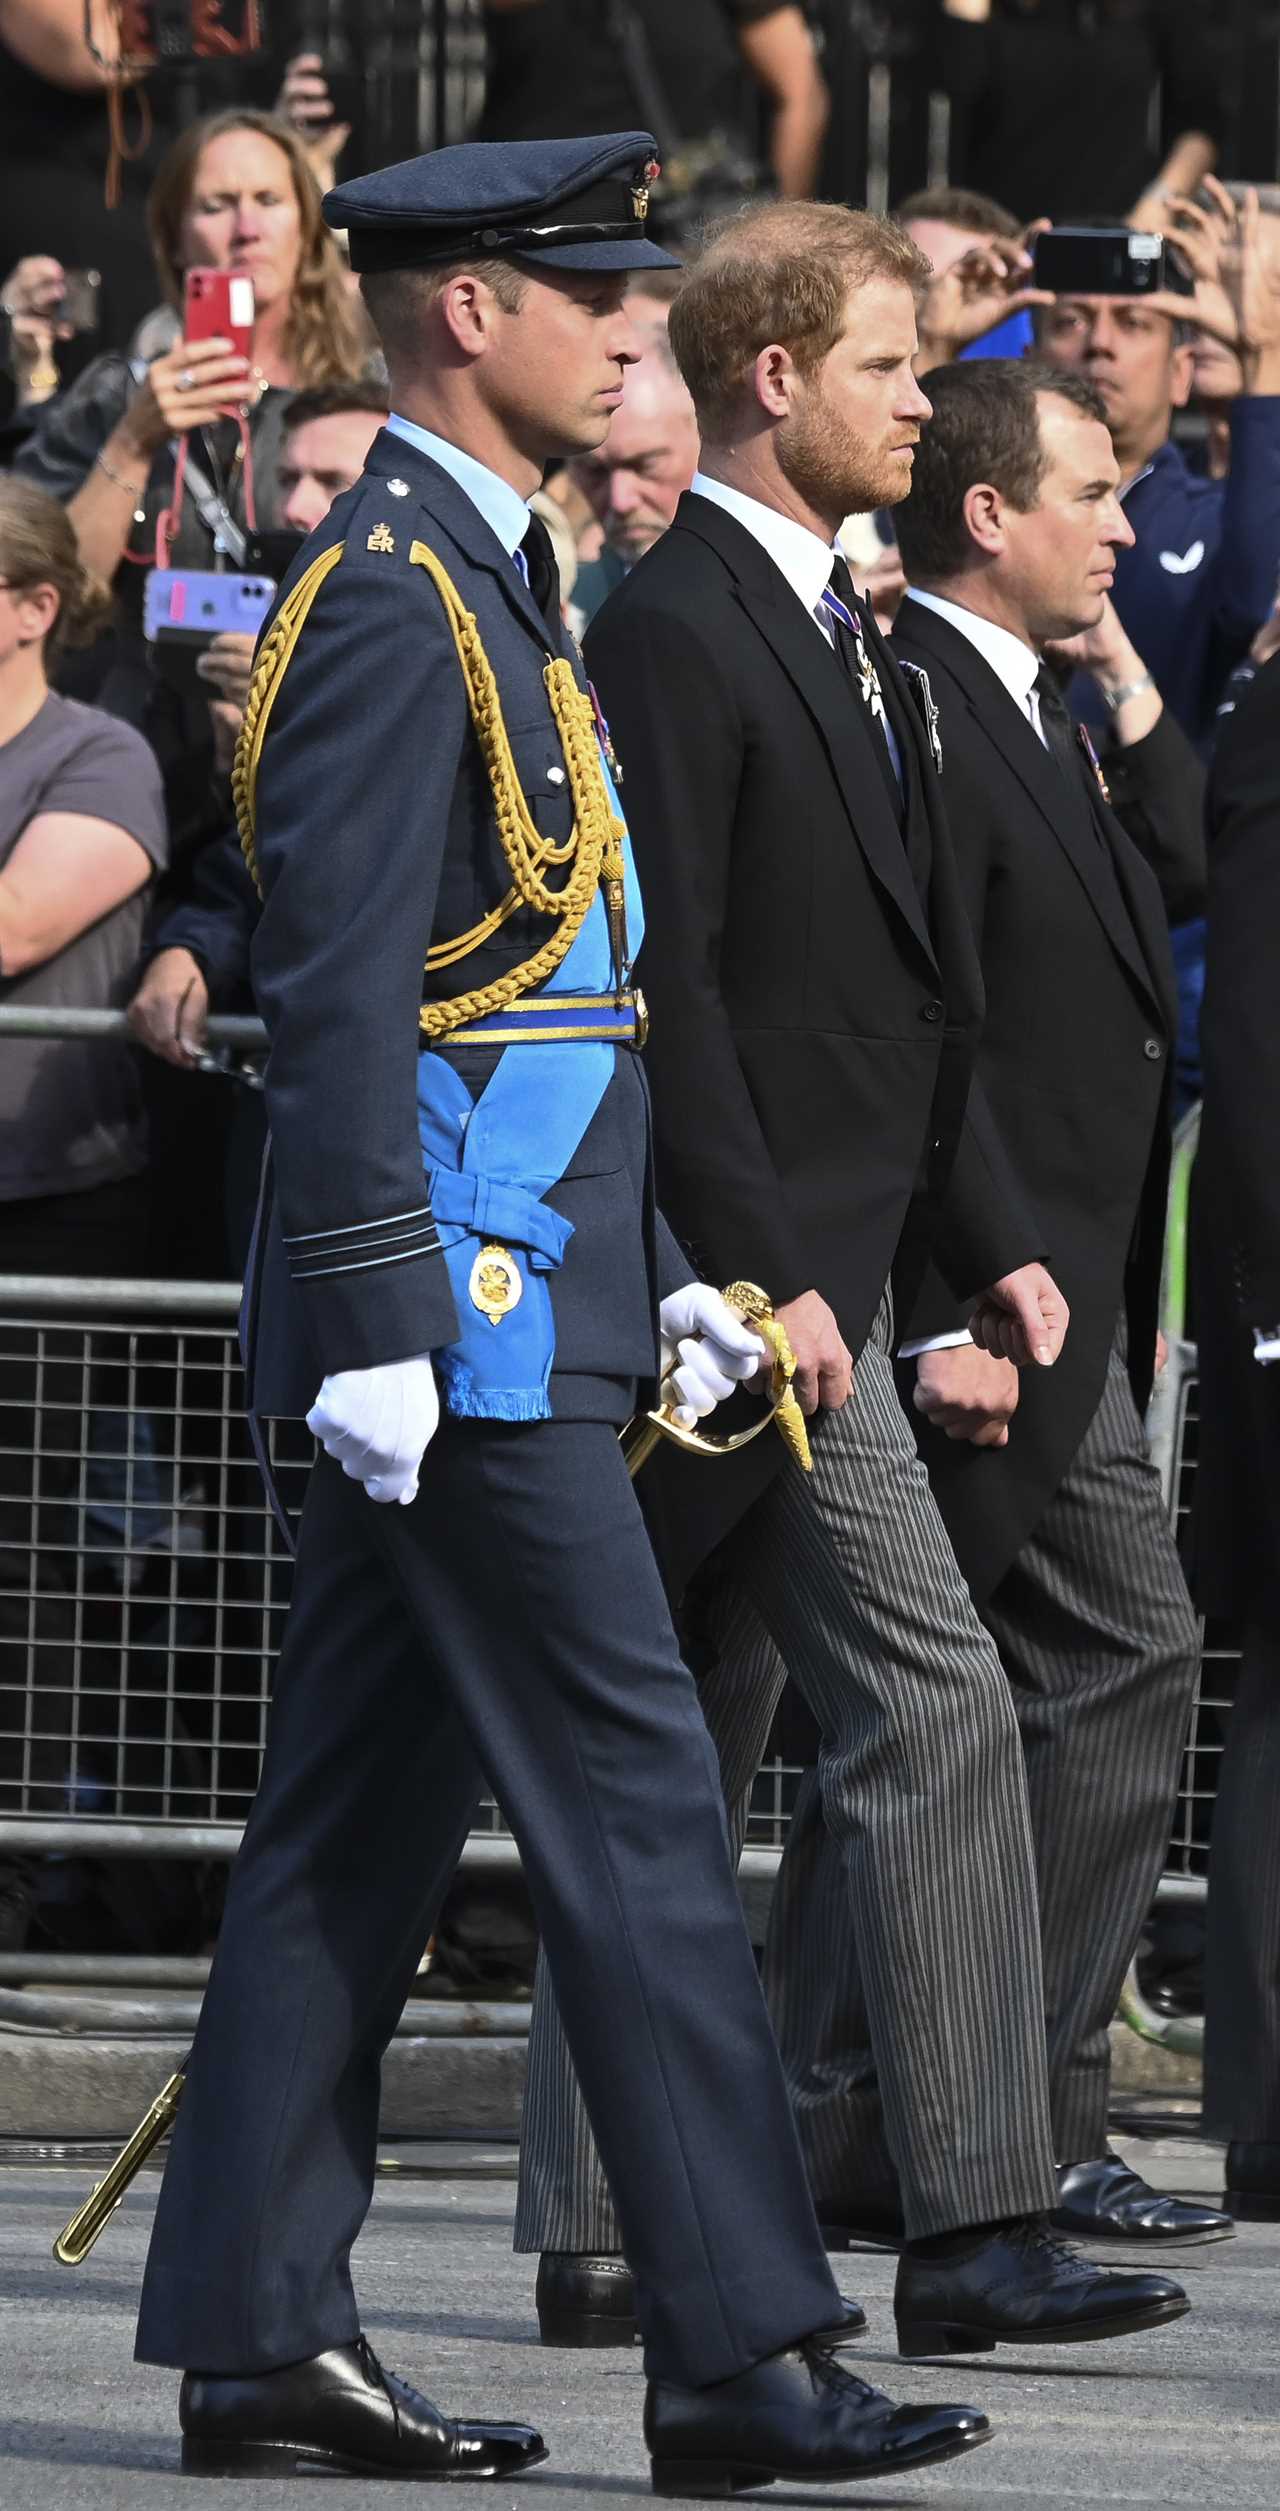 Prince Harry & William to stand together beside Queen’s coffin as they grieve with Royals at solemn Westminster funeral